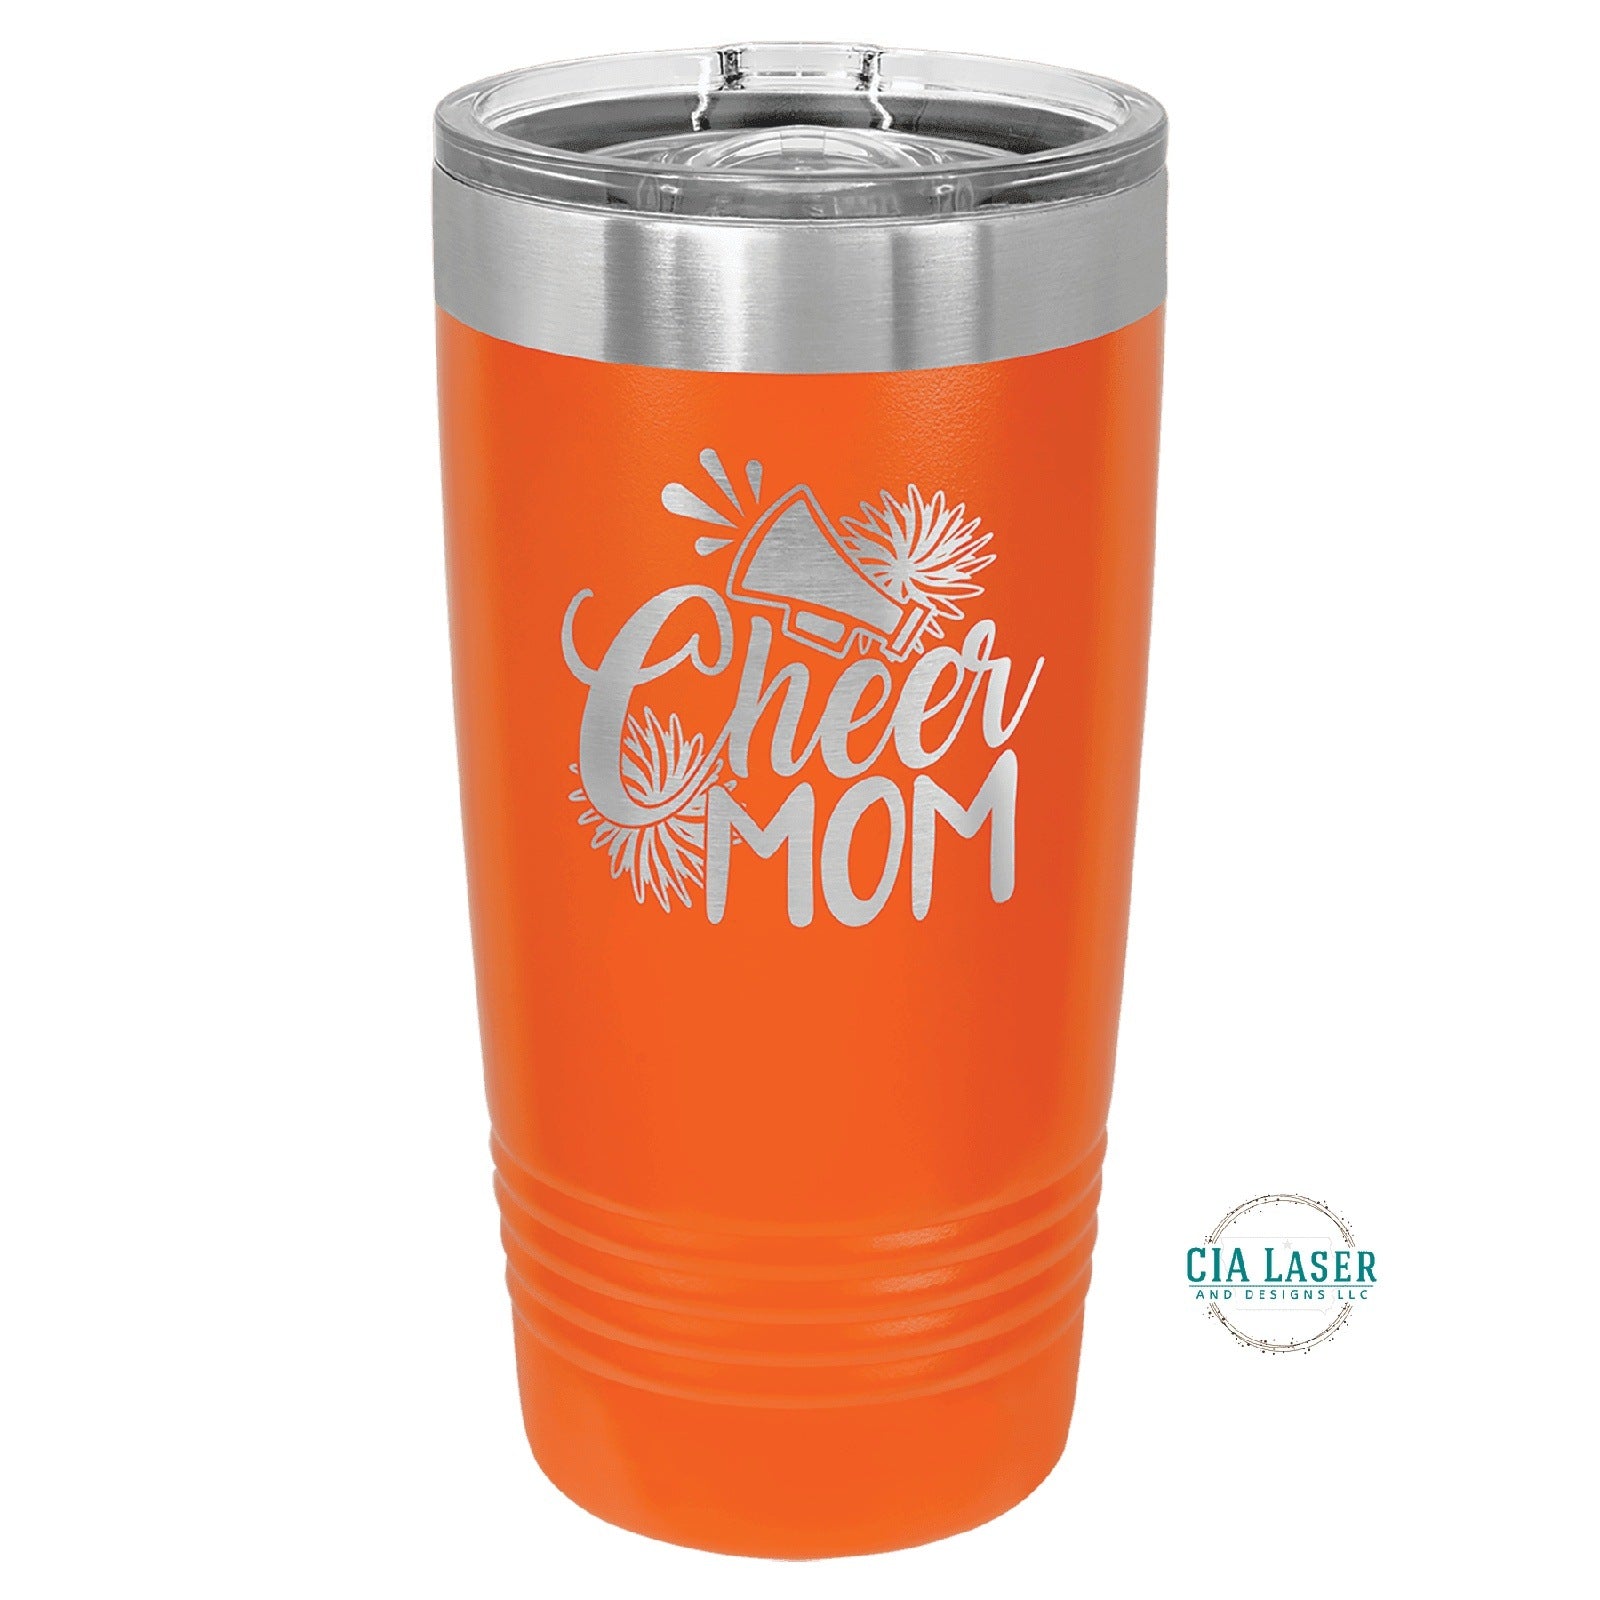 Personalized 20oz Tumbler, ADD YOUR LOGO, Wholesale Tumblers, Laser Engraved Cup, Corporate Gift, Branded, Powder Coated, Bulk Tumblers